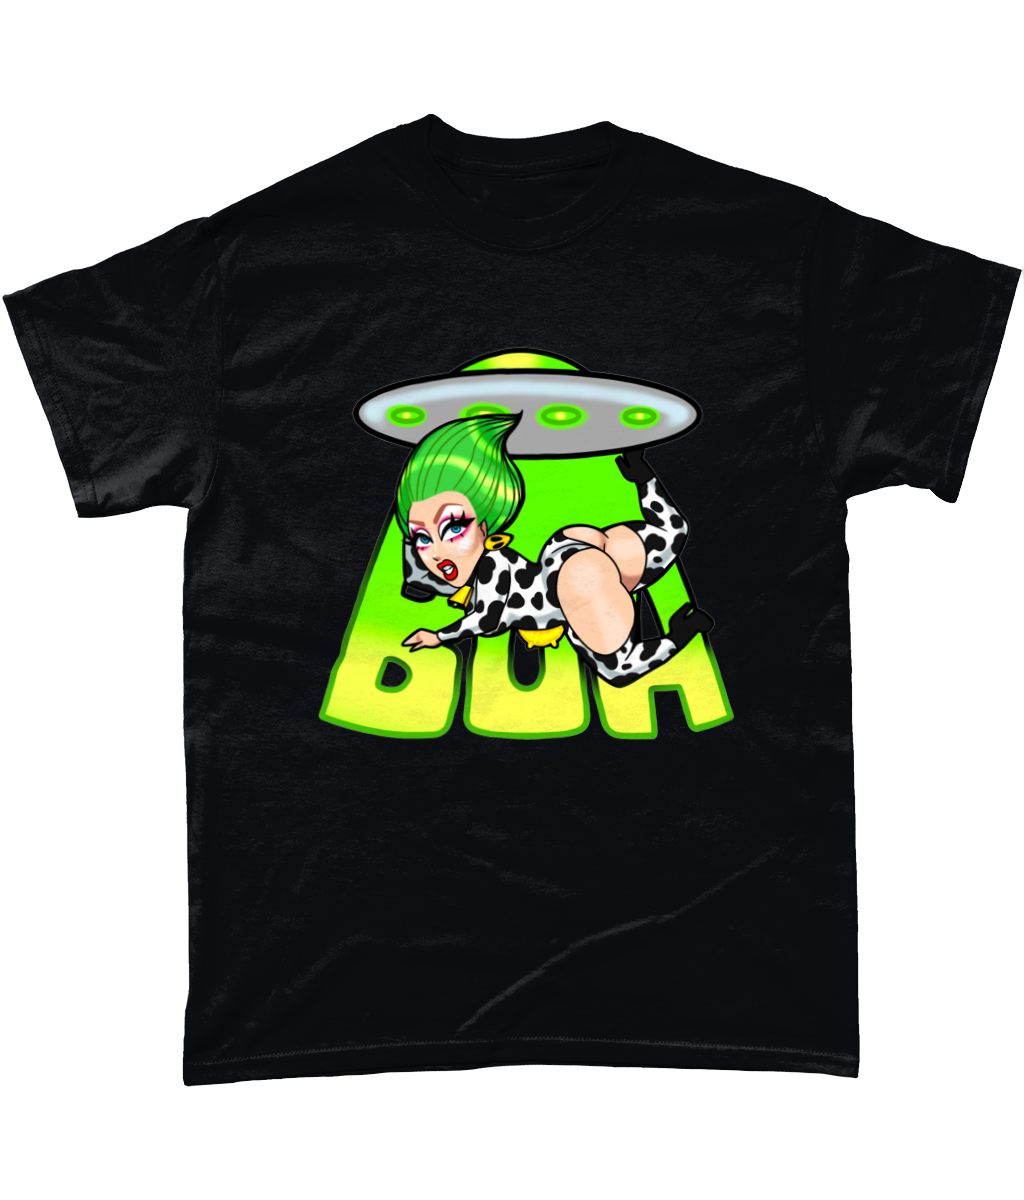 BOA - Beam Me Up T-shirt - SNATCHED MERCH